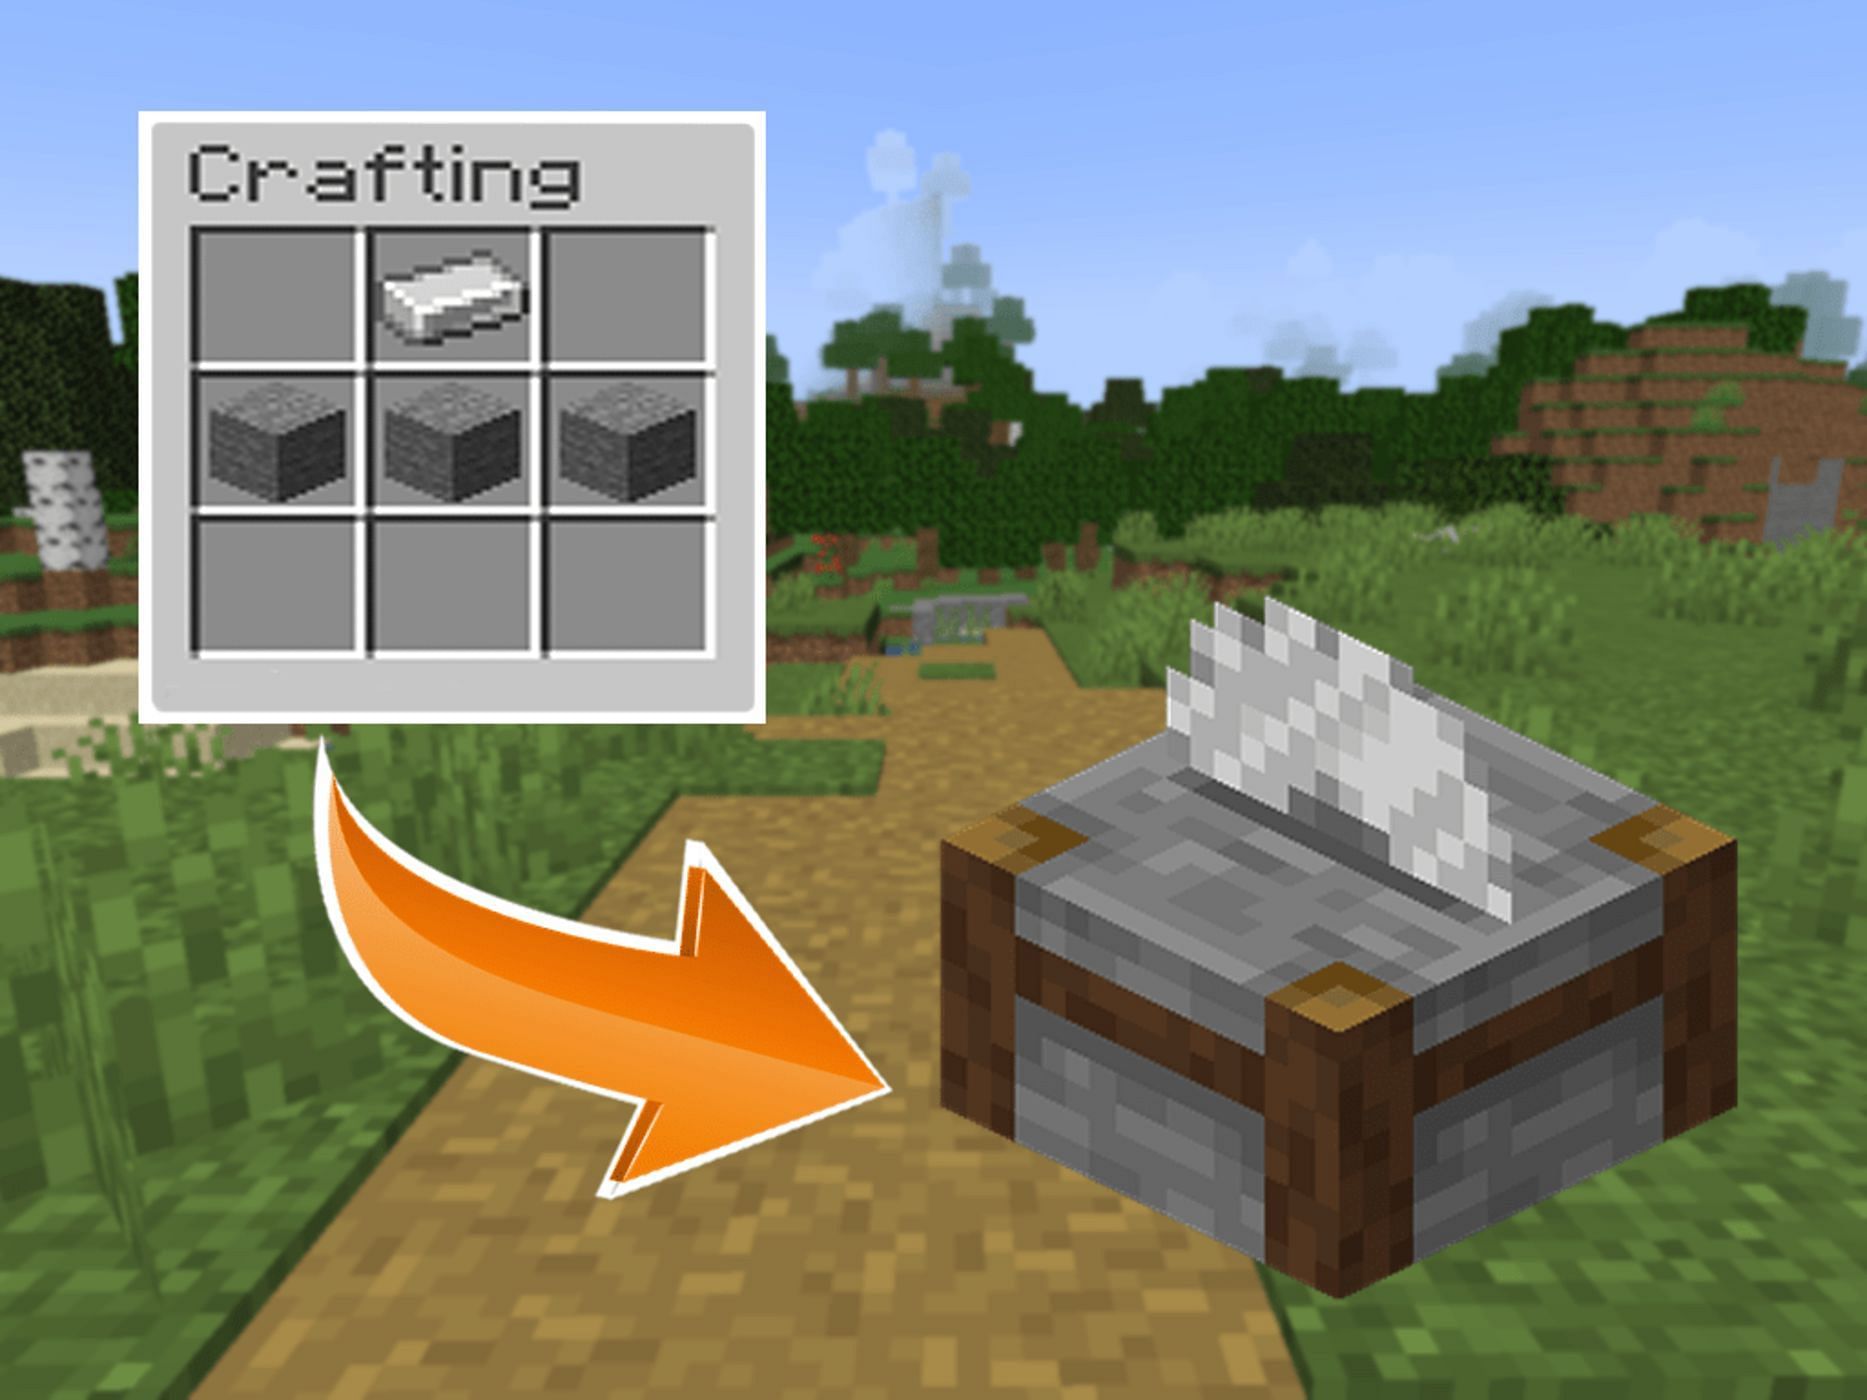 The crafting recipe to create a stonecutter in the game (Image via Mojang)